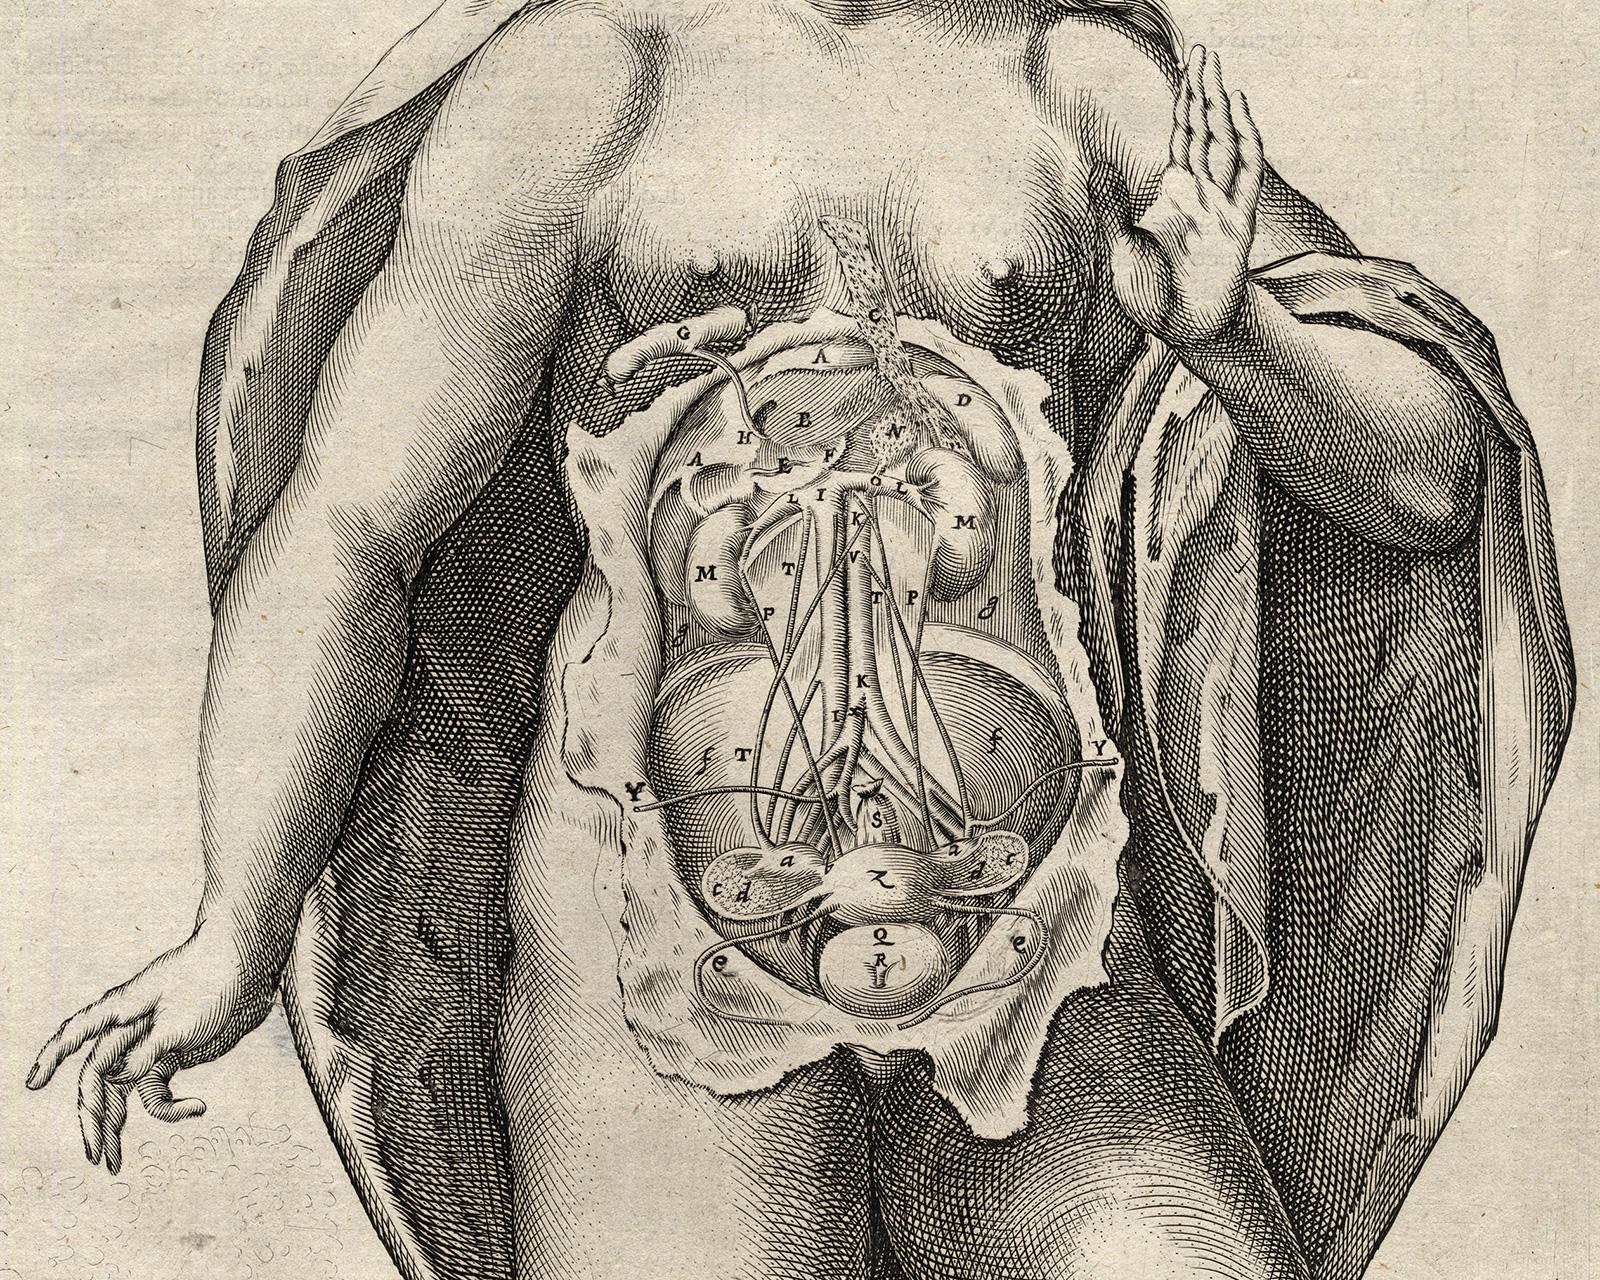 2 anatomical prints - Woman's abdomen by Spigelius - Engraving - 17th century - Old Masters Print by Adrianus Spigelius